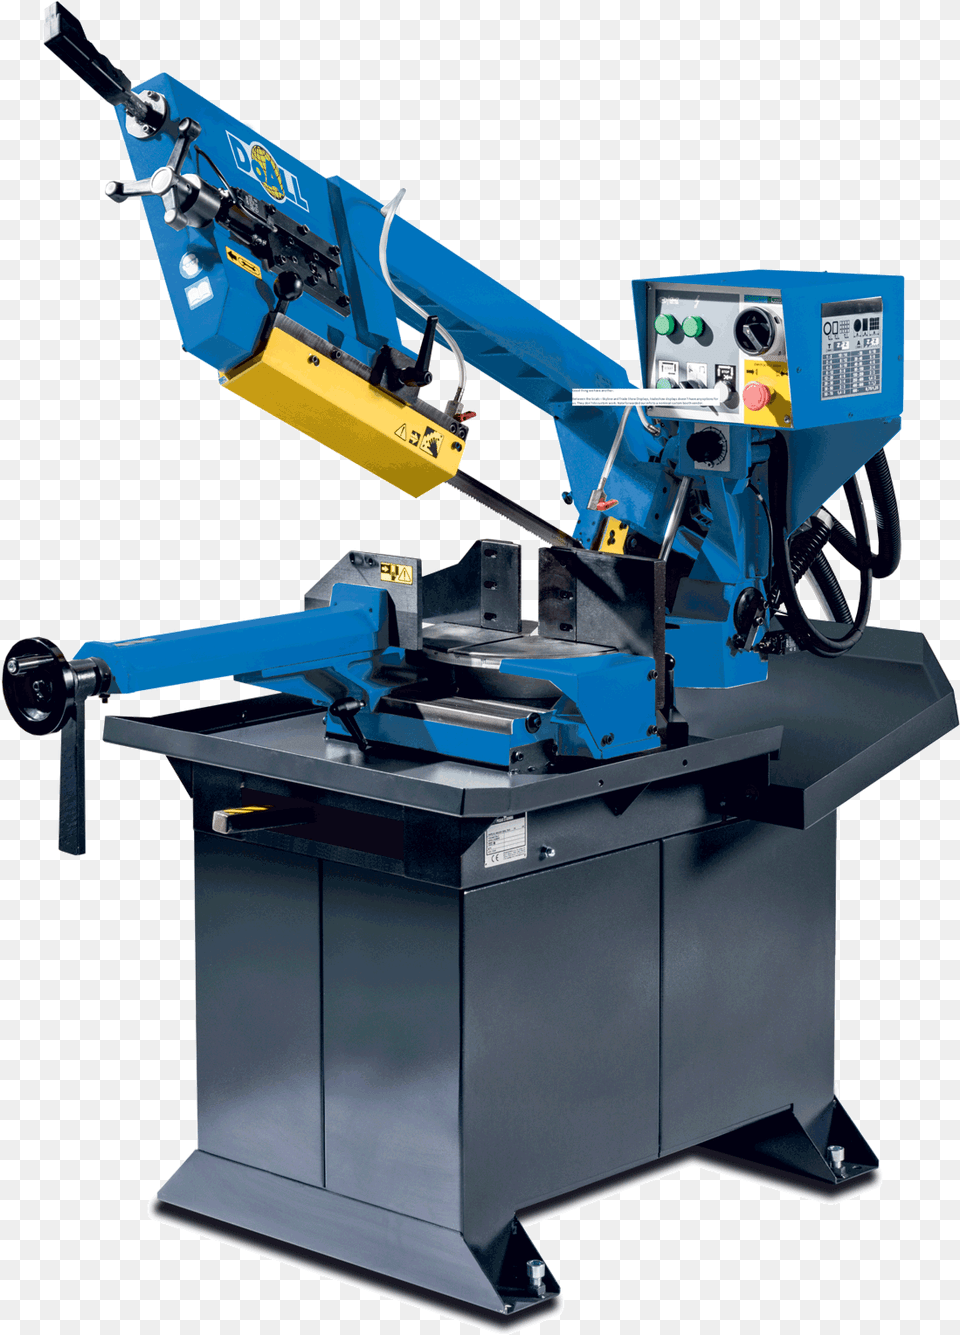 Doall Ds 280m Do All Metal Band Saw, Bulldozer, Machine Png Image